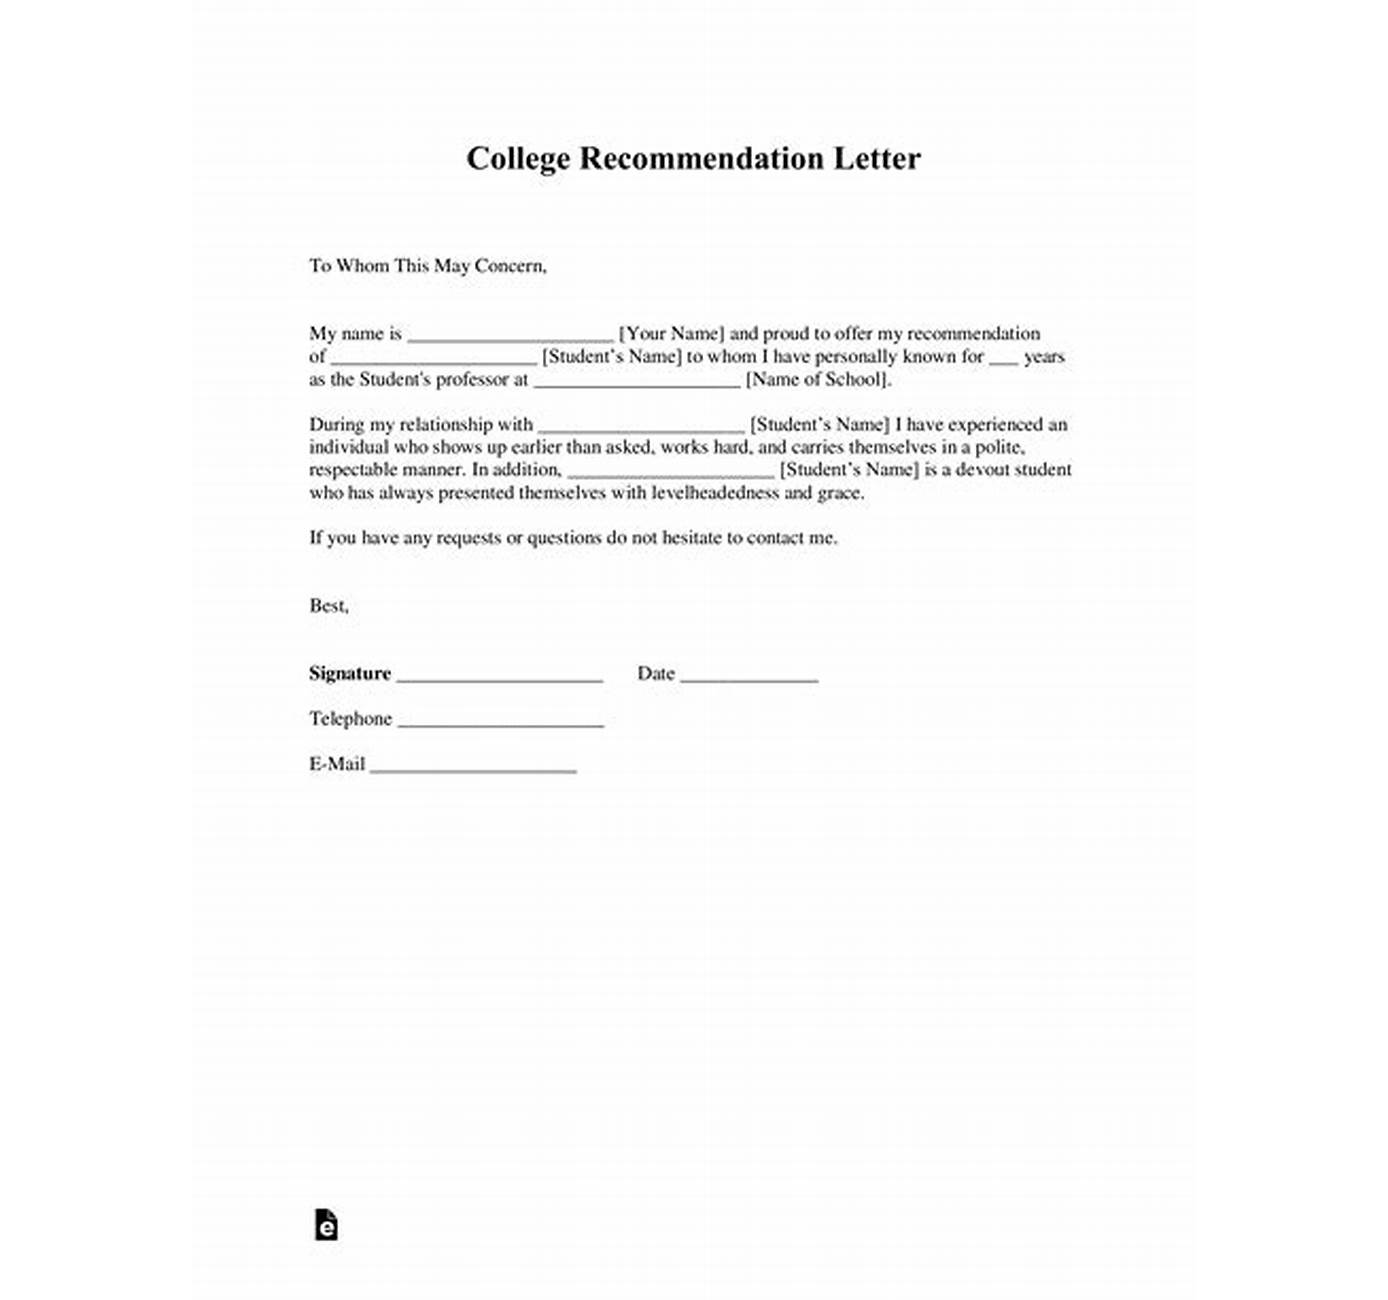 old college letter recommendation image